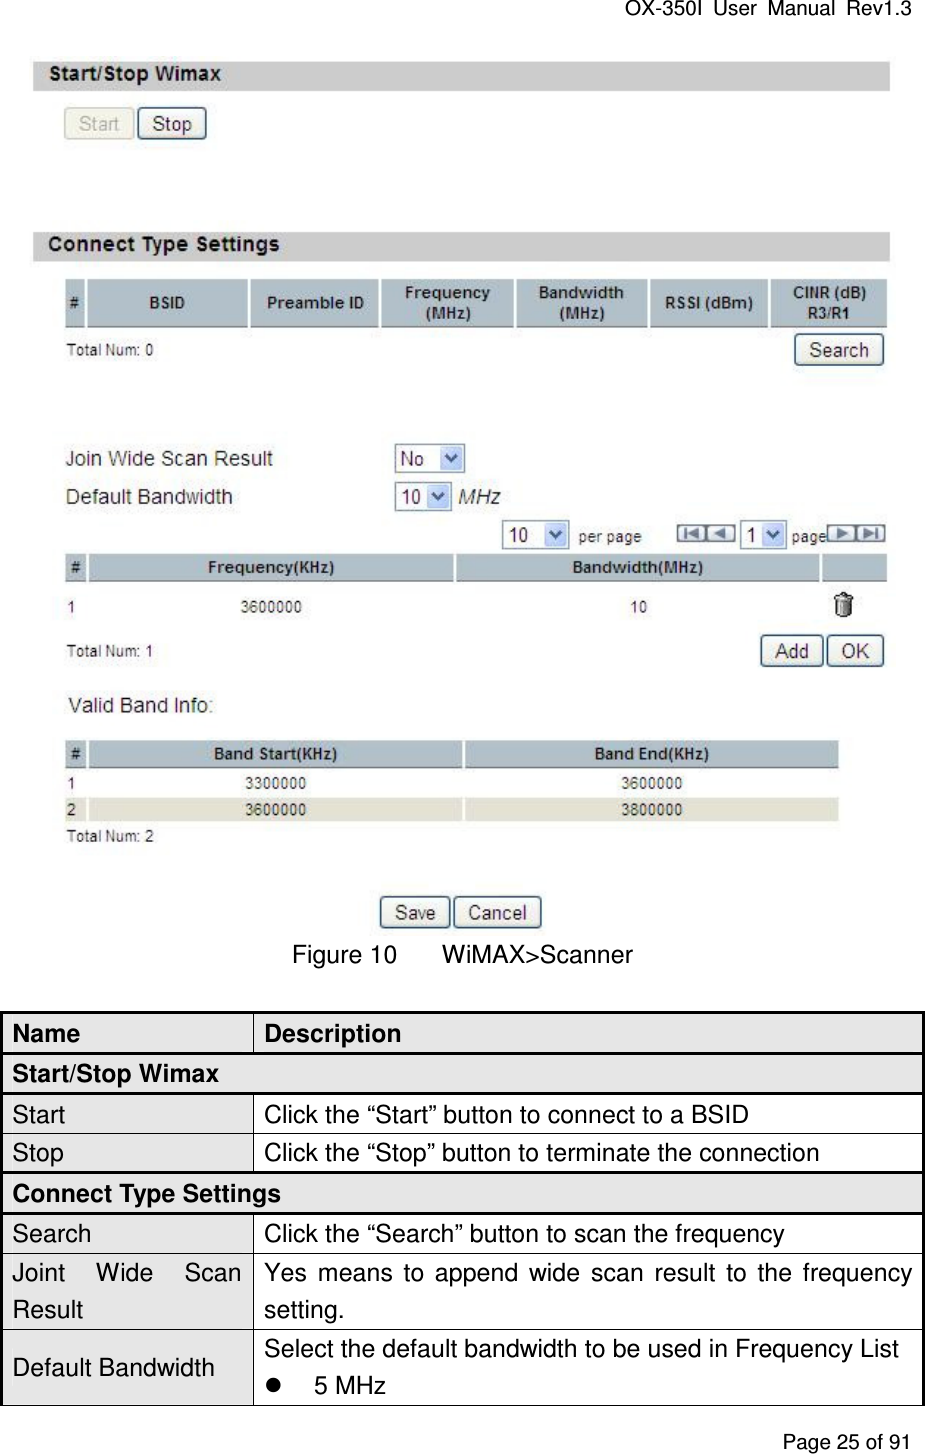 OX-350I  User  Manual  Rev1.3 Page 25 of 91  Figure 10  WiMAX&gt;Scanner Name  Description Start/Stop Wimax Start  Click the “Start” button to connect to a BSID Stop  Click the “Stop” button to terminate the connection Connect Type Settings Search  Click the “Search” button to scan the frequency Joint  Wide  Scan Result Yes  means  to  append  wide  scan  result  to  the  frequency setting. Default Bandwidth  Select the default bandwidth to be used in Frequency List   5 MHz 